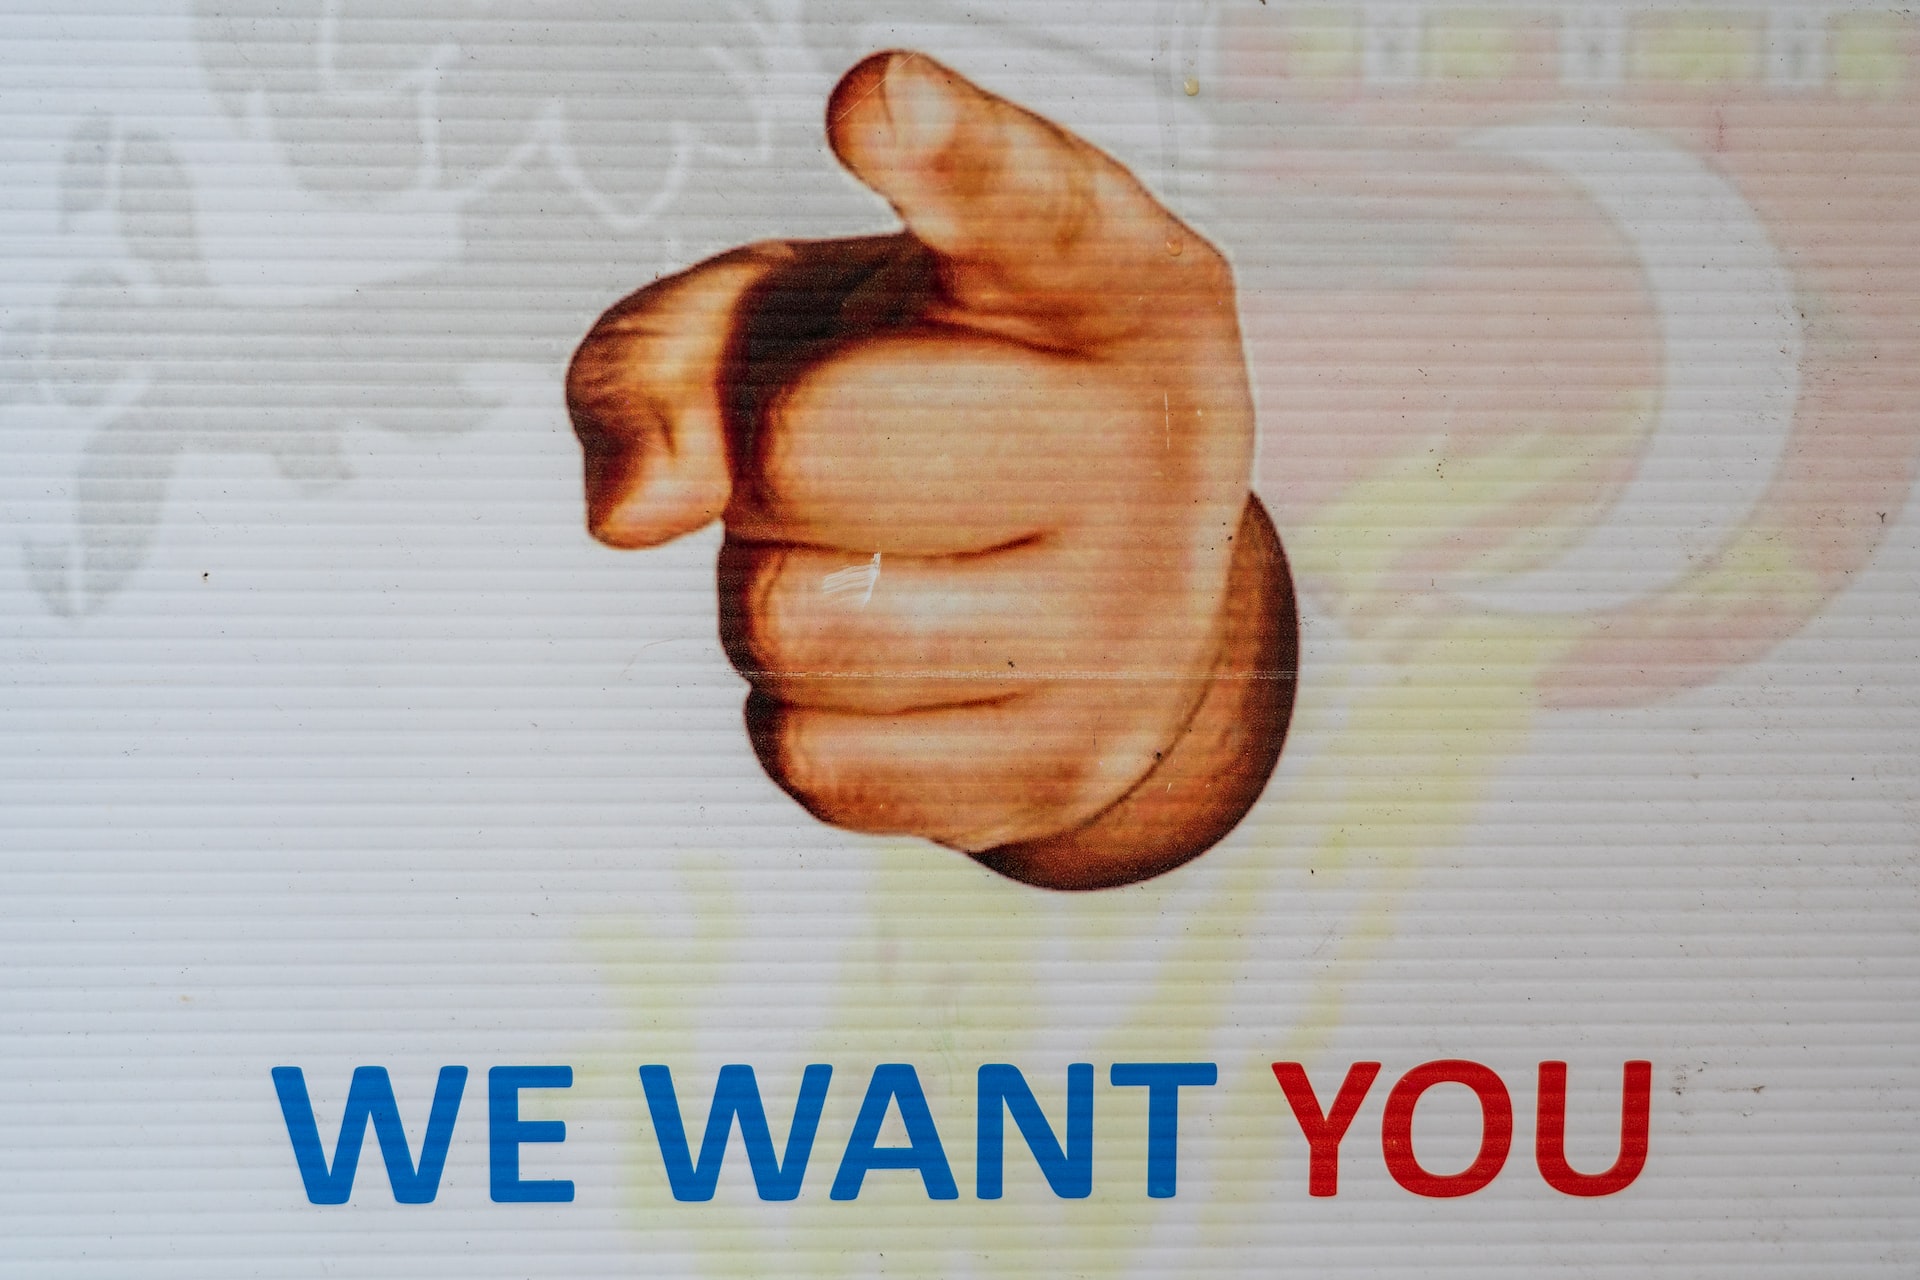 Recruitment: We want you